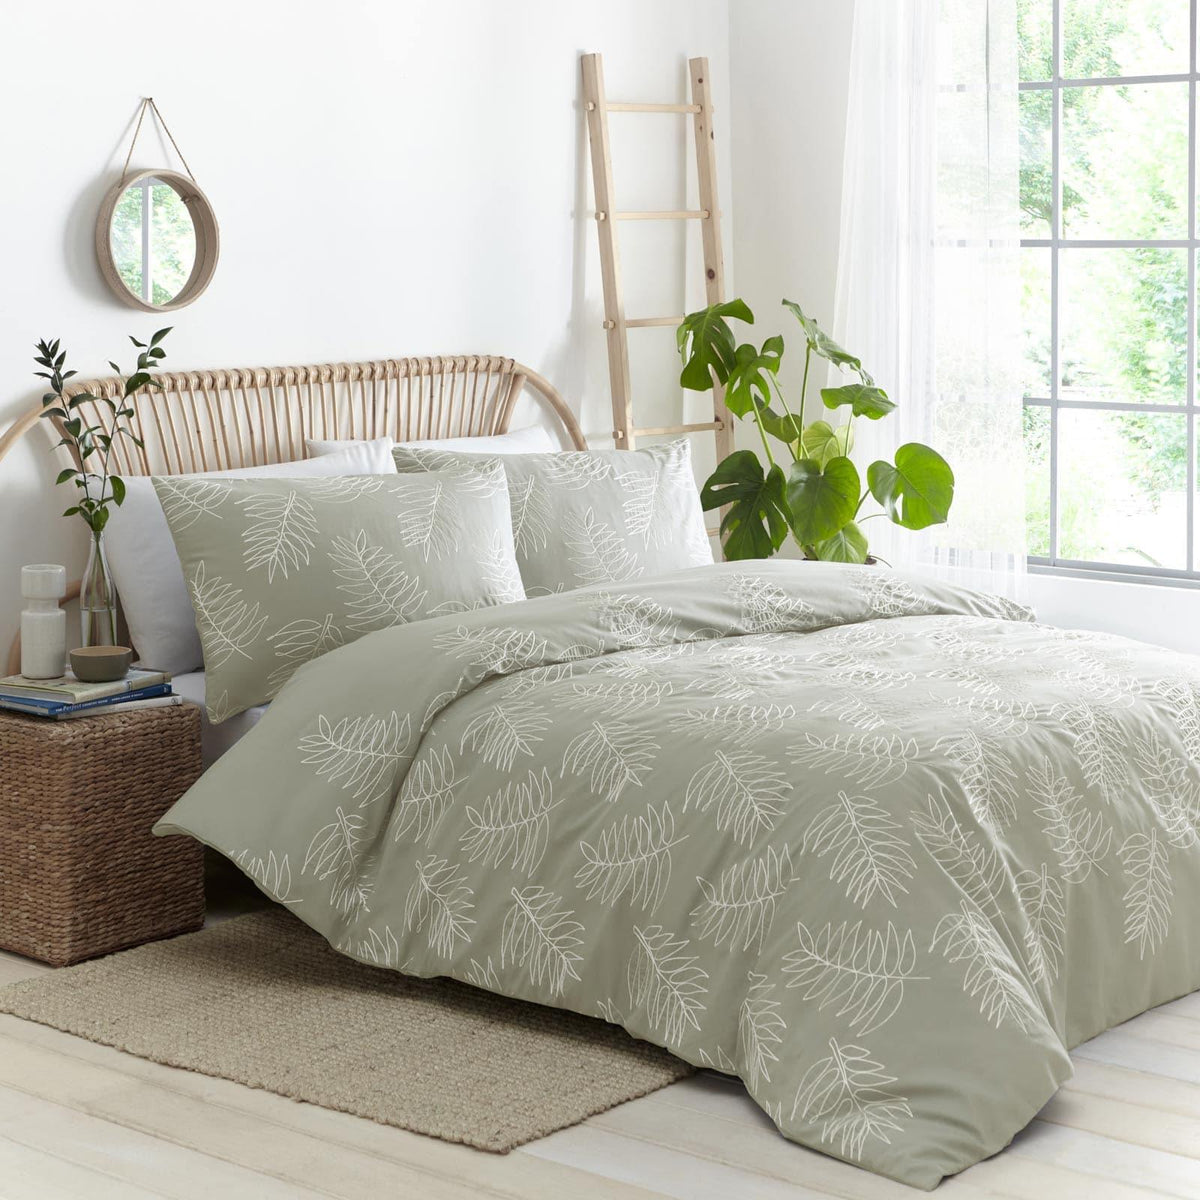 Palma Embroidered Sage Green Duvet Cover Set Ideal Explore a wide range of  possibilities: Explore our wide choice